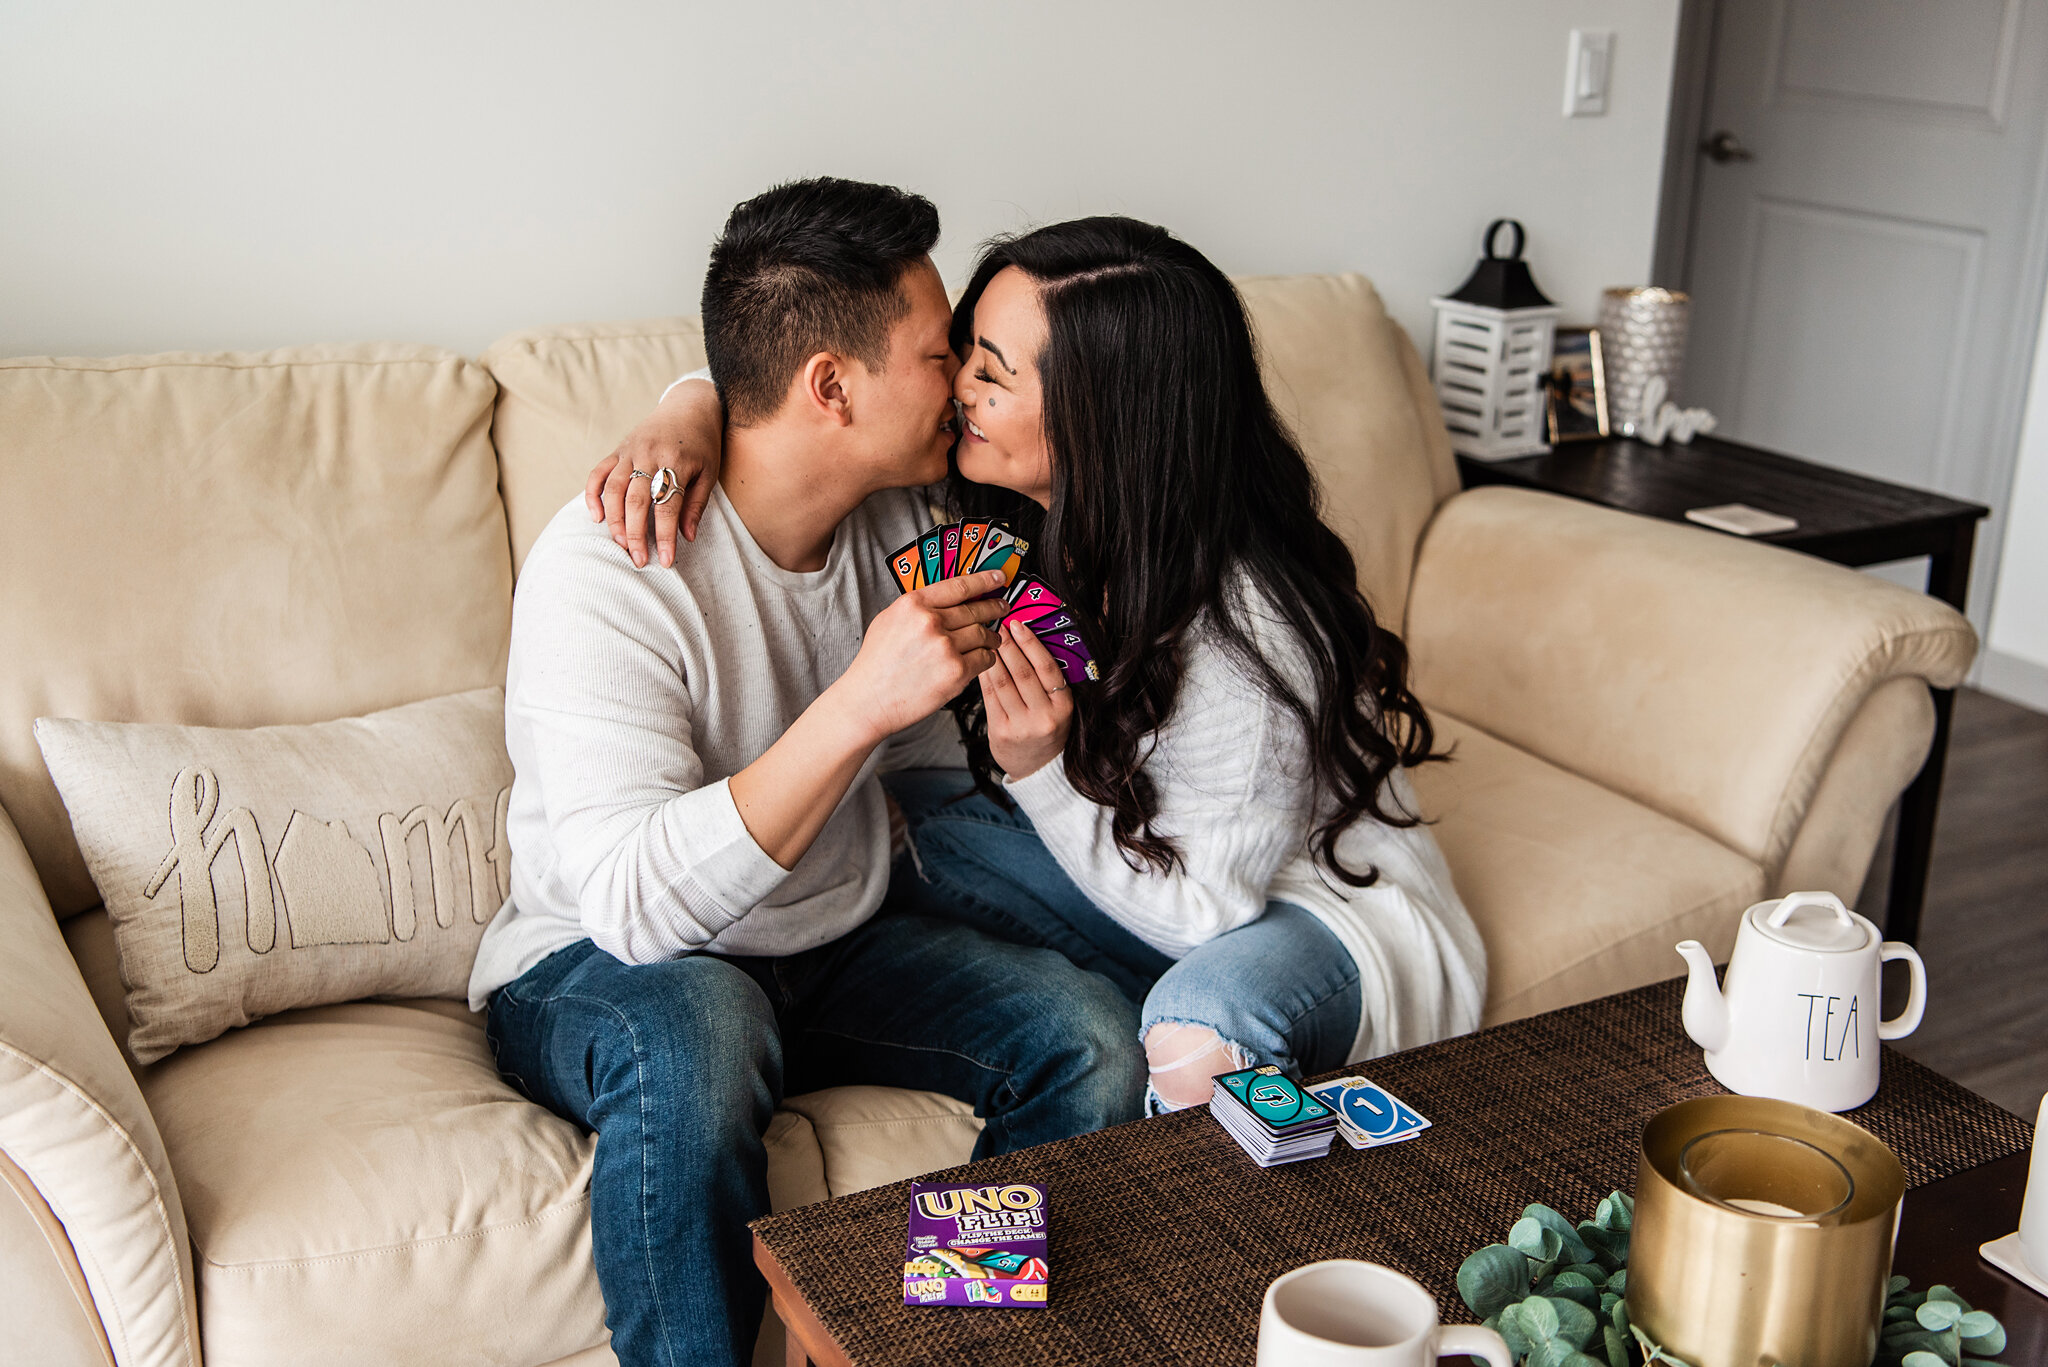 In_Home_Rochester_Couples_Session_JILL_STUDIO_Rochester_NY_Photographer_4348.jpg